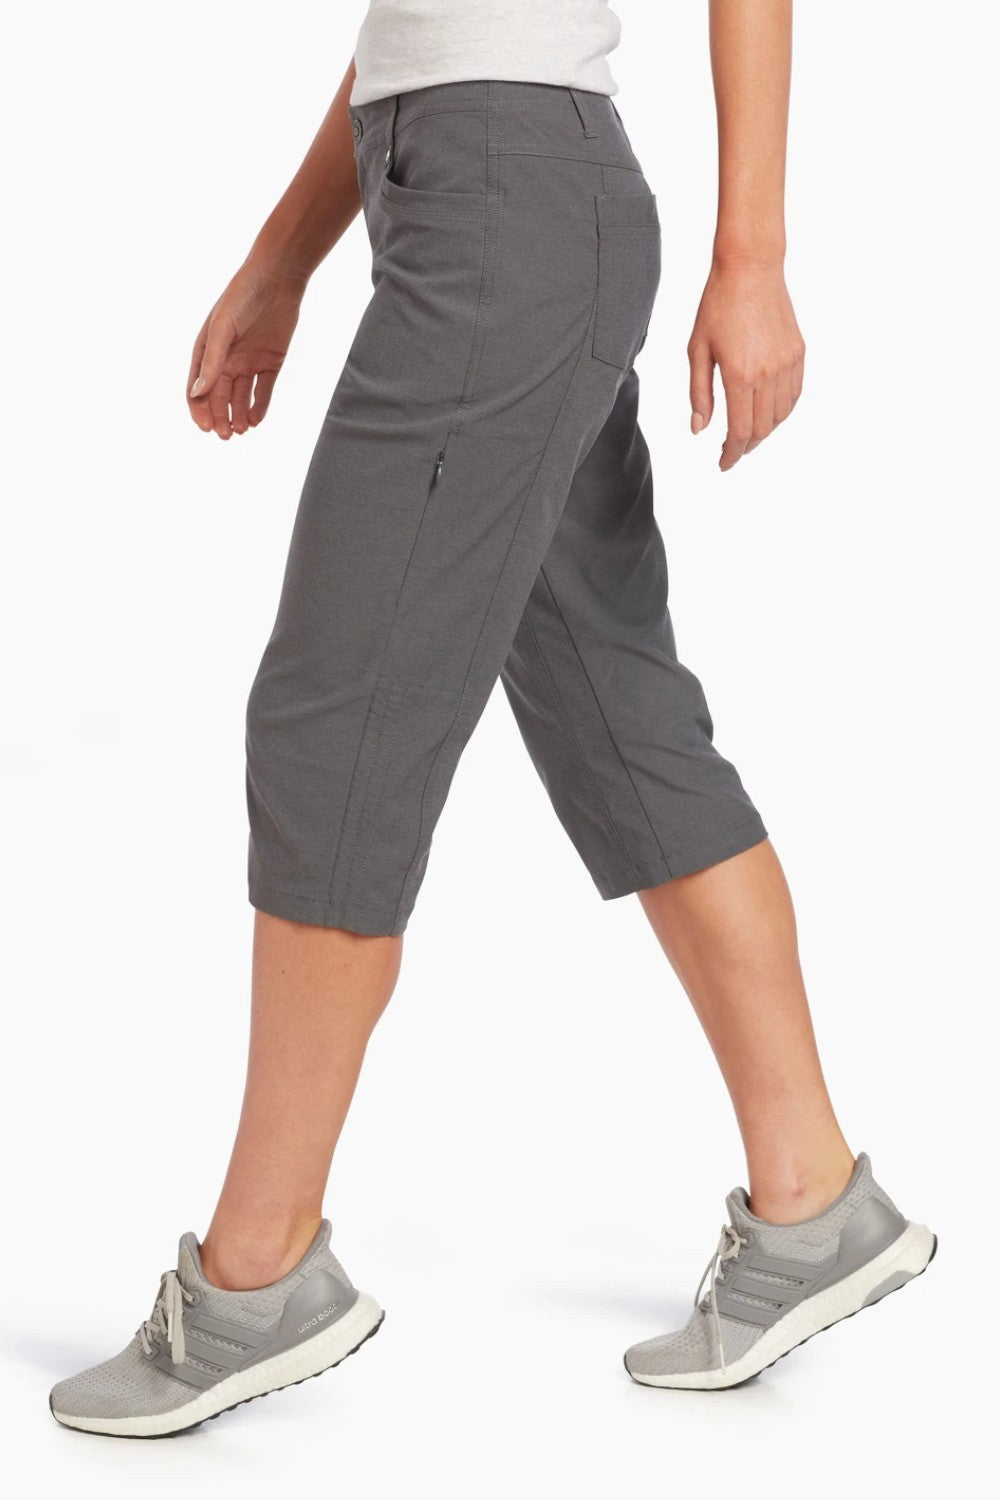 Work, travel, or on the trail, the versatile TREKR™ KAPRI is made for women on the move. Soft yet durable, this capri features superior stretch with rebound to maximize every stride while maintaining form and fit. Innovative side seams cinch up for easy conversion into shorts! Premium everyday comfort and two-for-one performance.